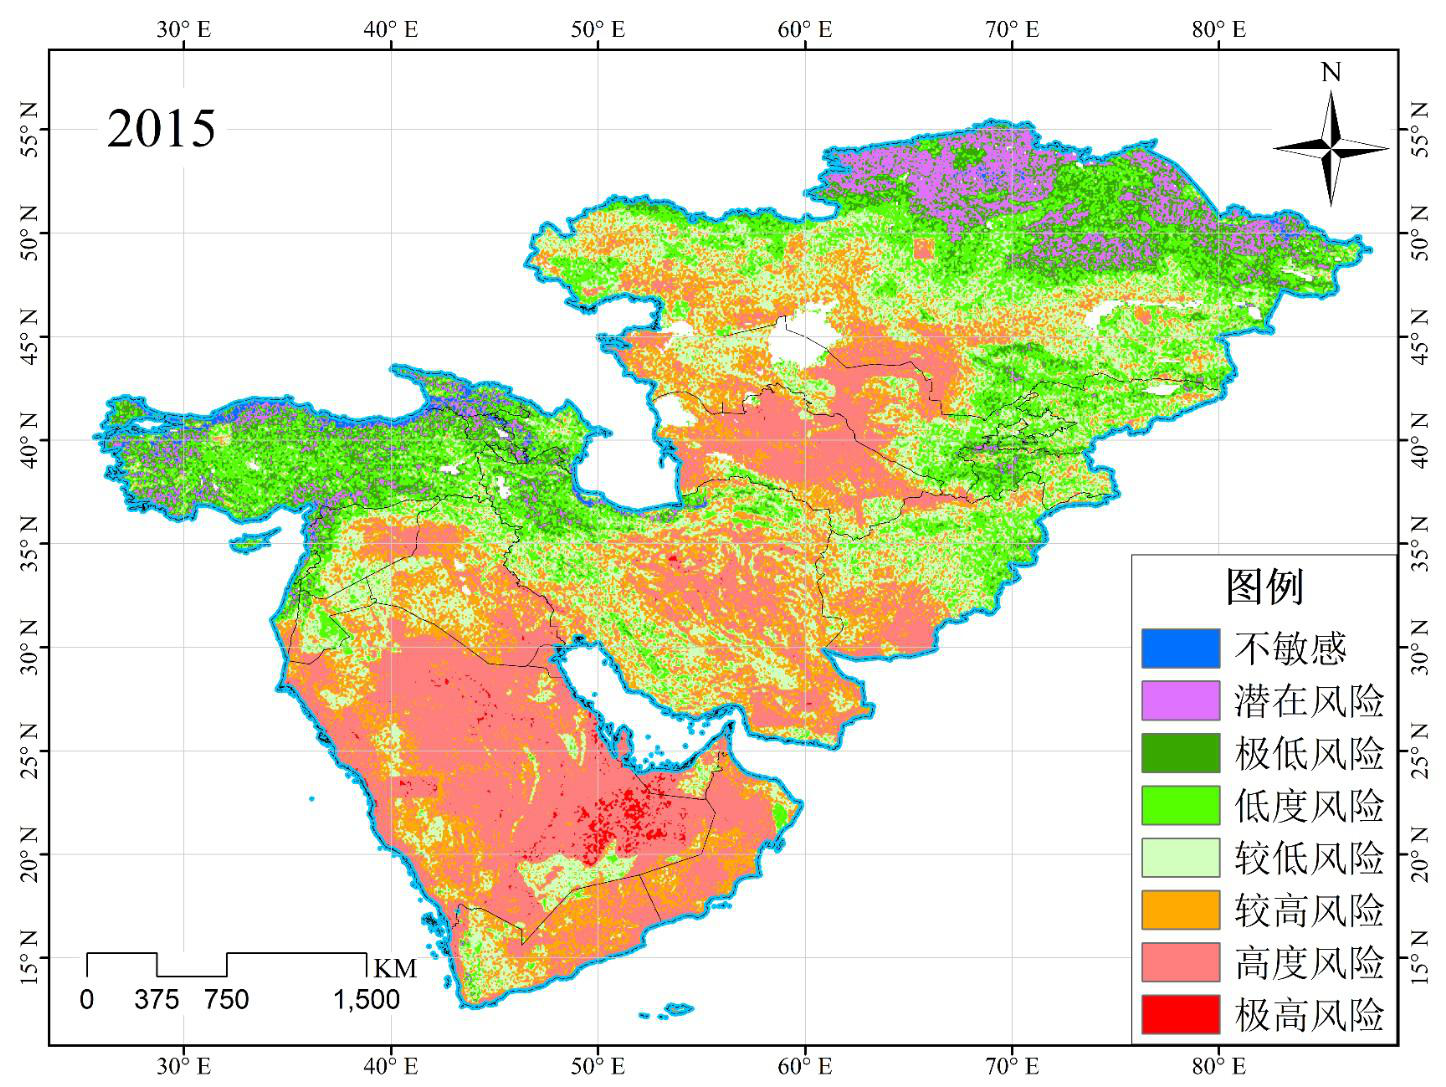 The desertification risk map in Central-Western Asia (2015)